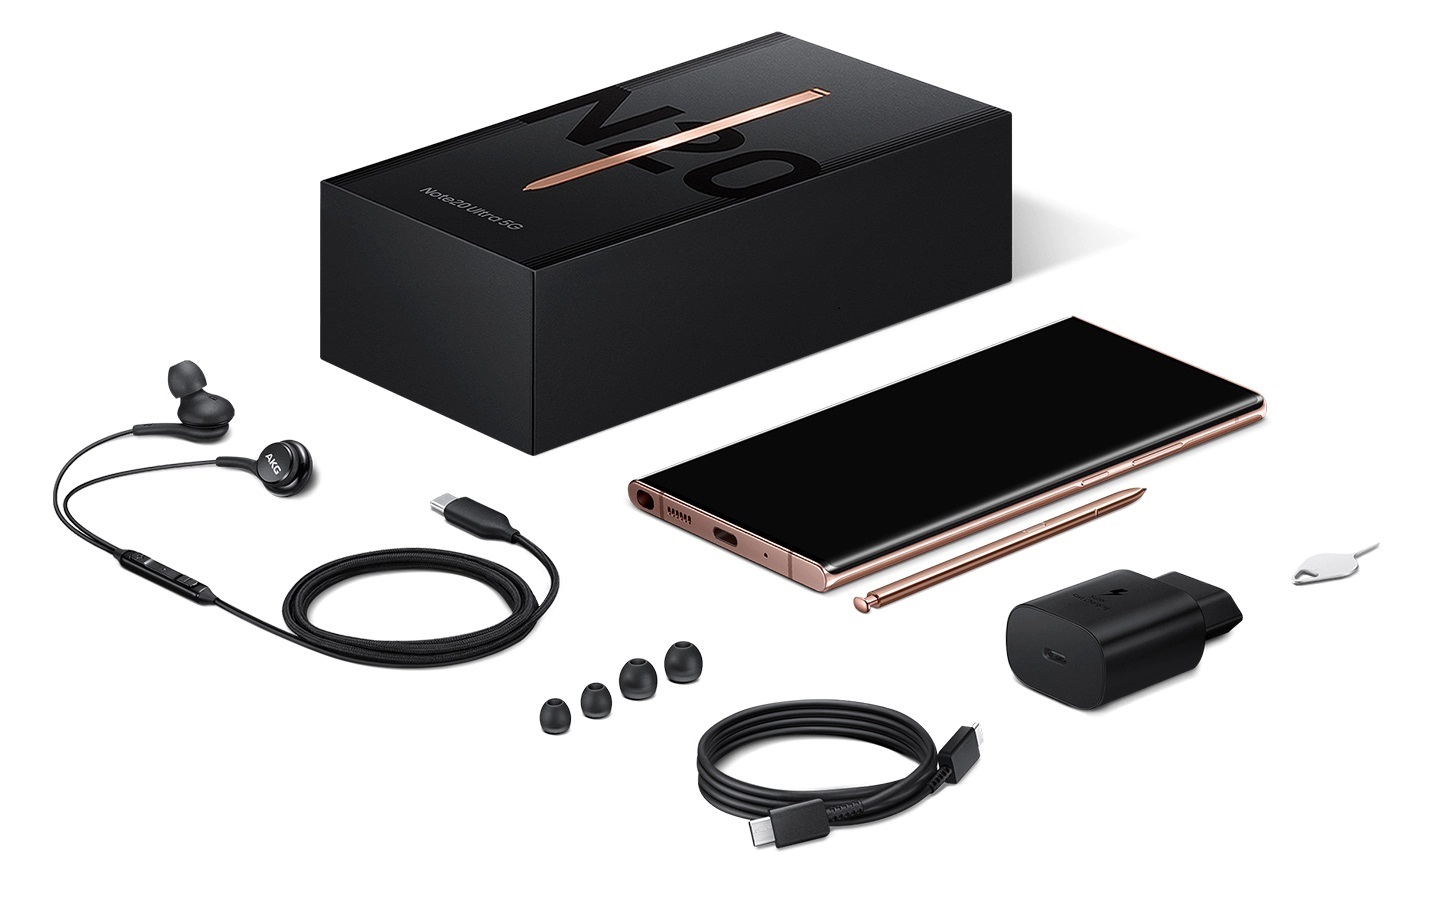 Beautiful black box for with its content layout out beside it, placed symmetrically. Items include: A Samsung Galaxy Note20 mobile device, charger and cable, earphones with replacement buds, an S pen and a clear case.